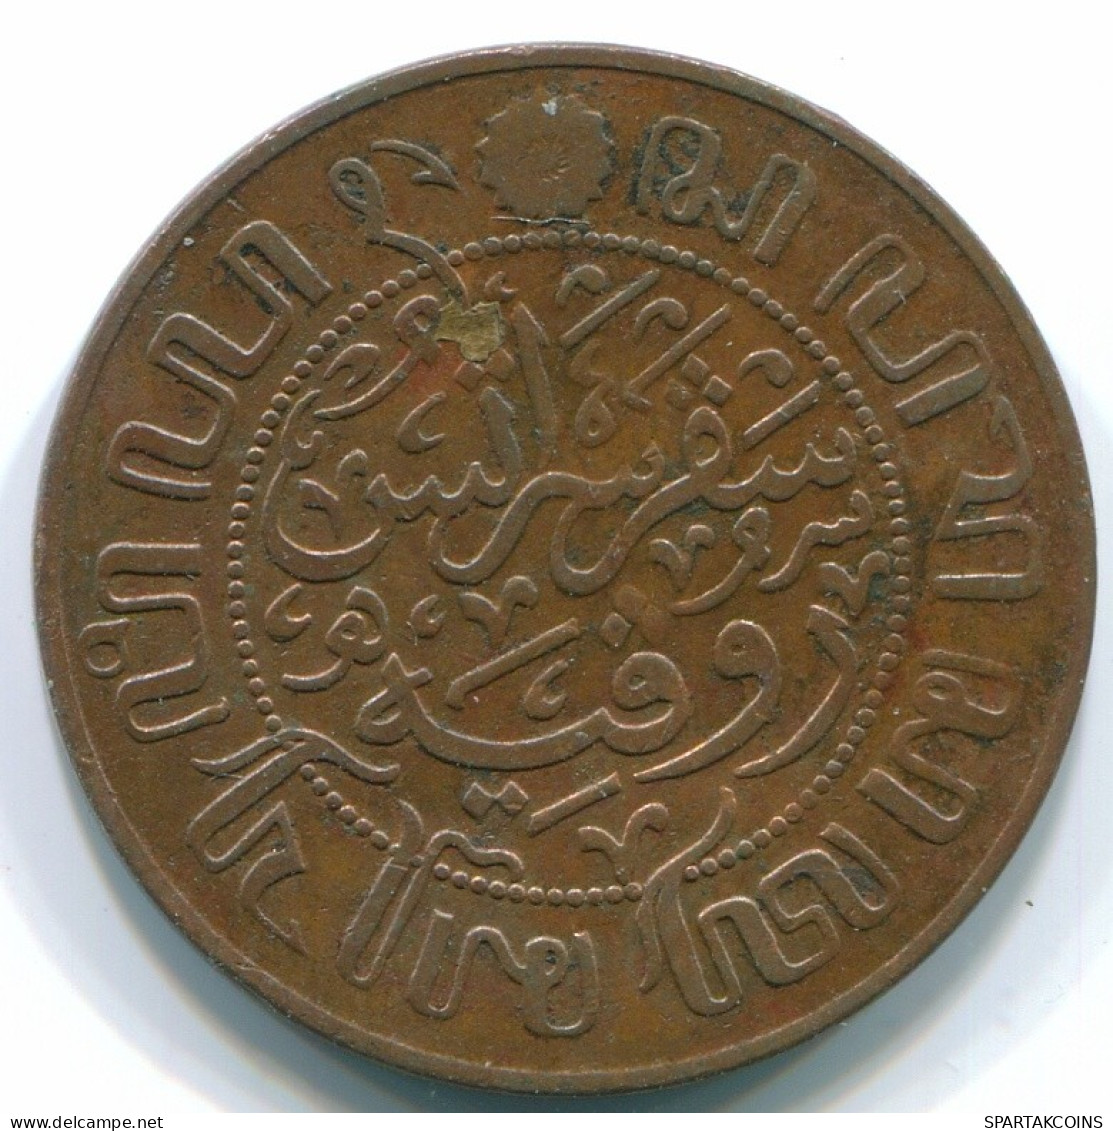 1 CENT 1929 NETHERLANDS EAST INDIES INDONESIA Copper Colonial Coin #S10110.U.A - Indes Néerlandaises